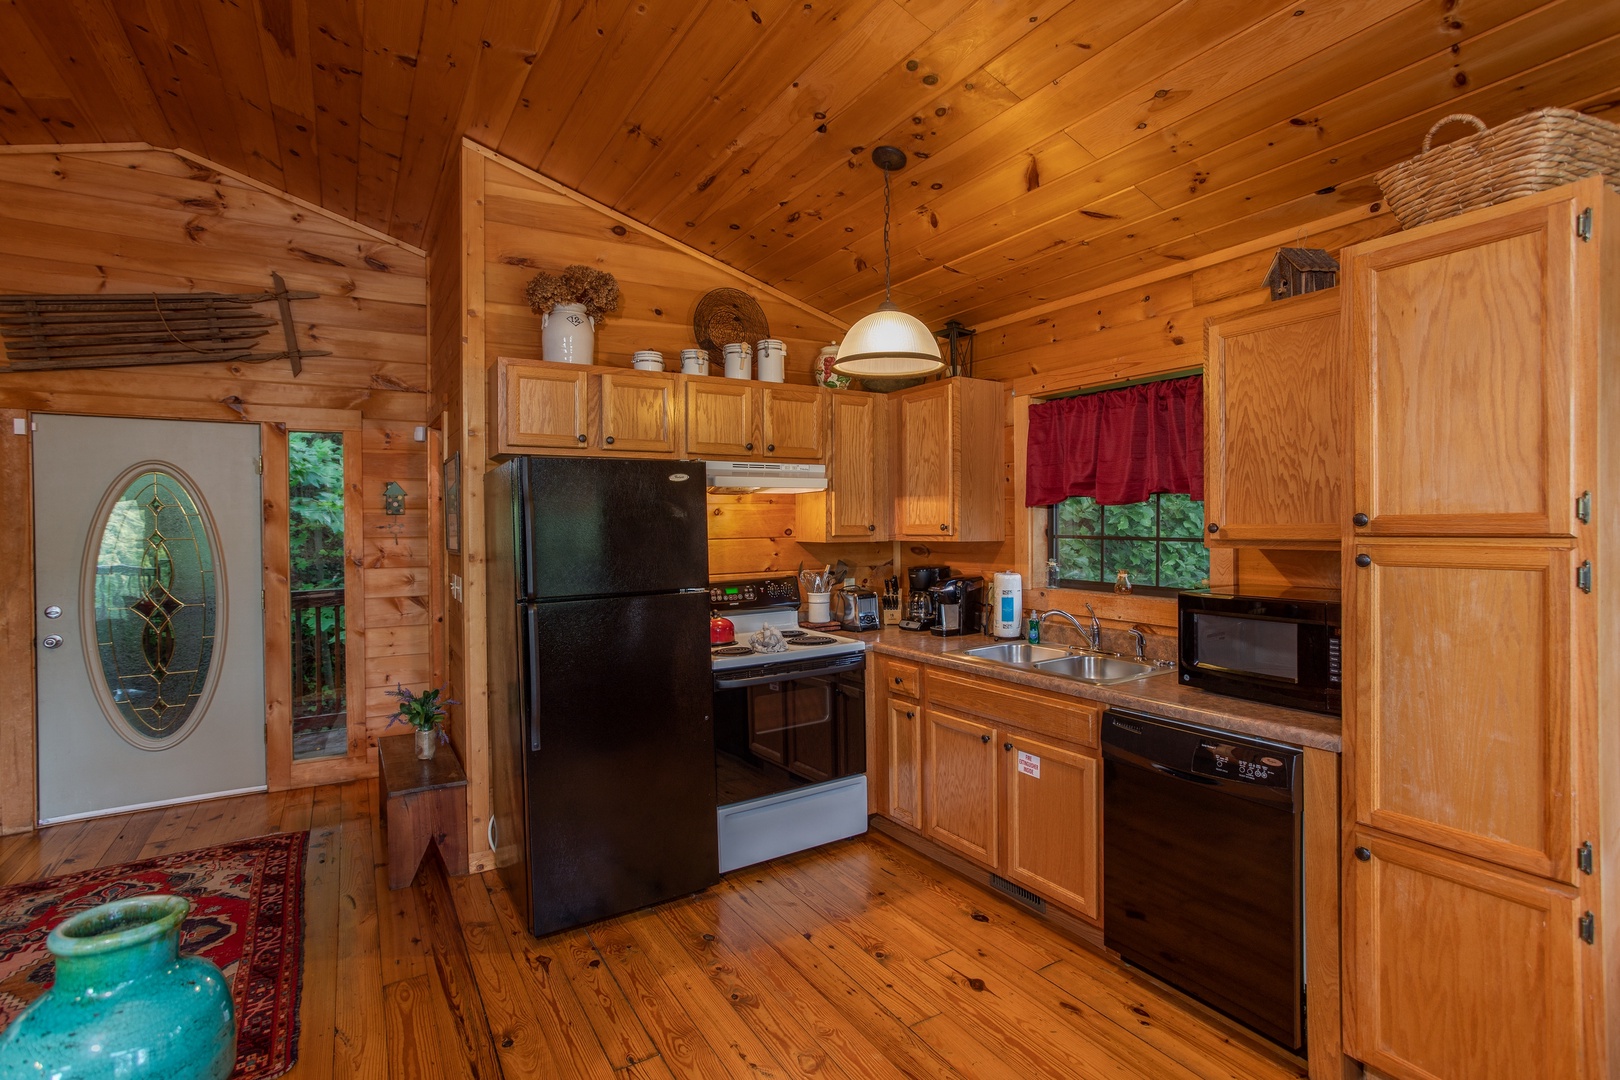 Kitchen with appliances at A View for You, a 1 bedroom cabin rental located in Pigeon Forge